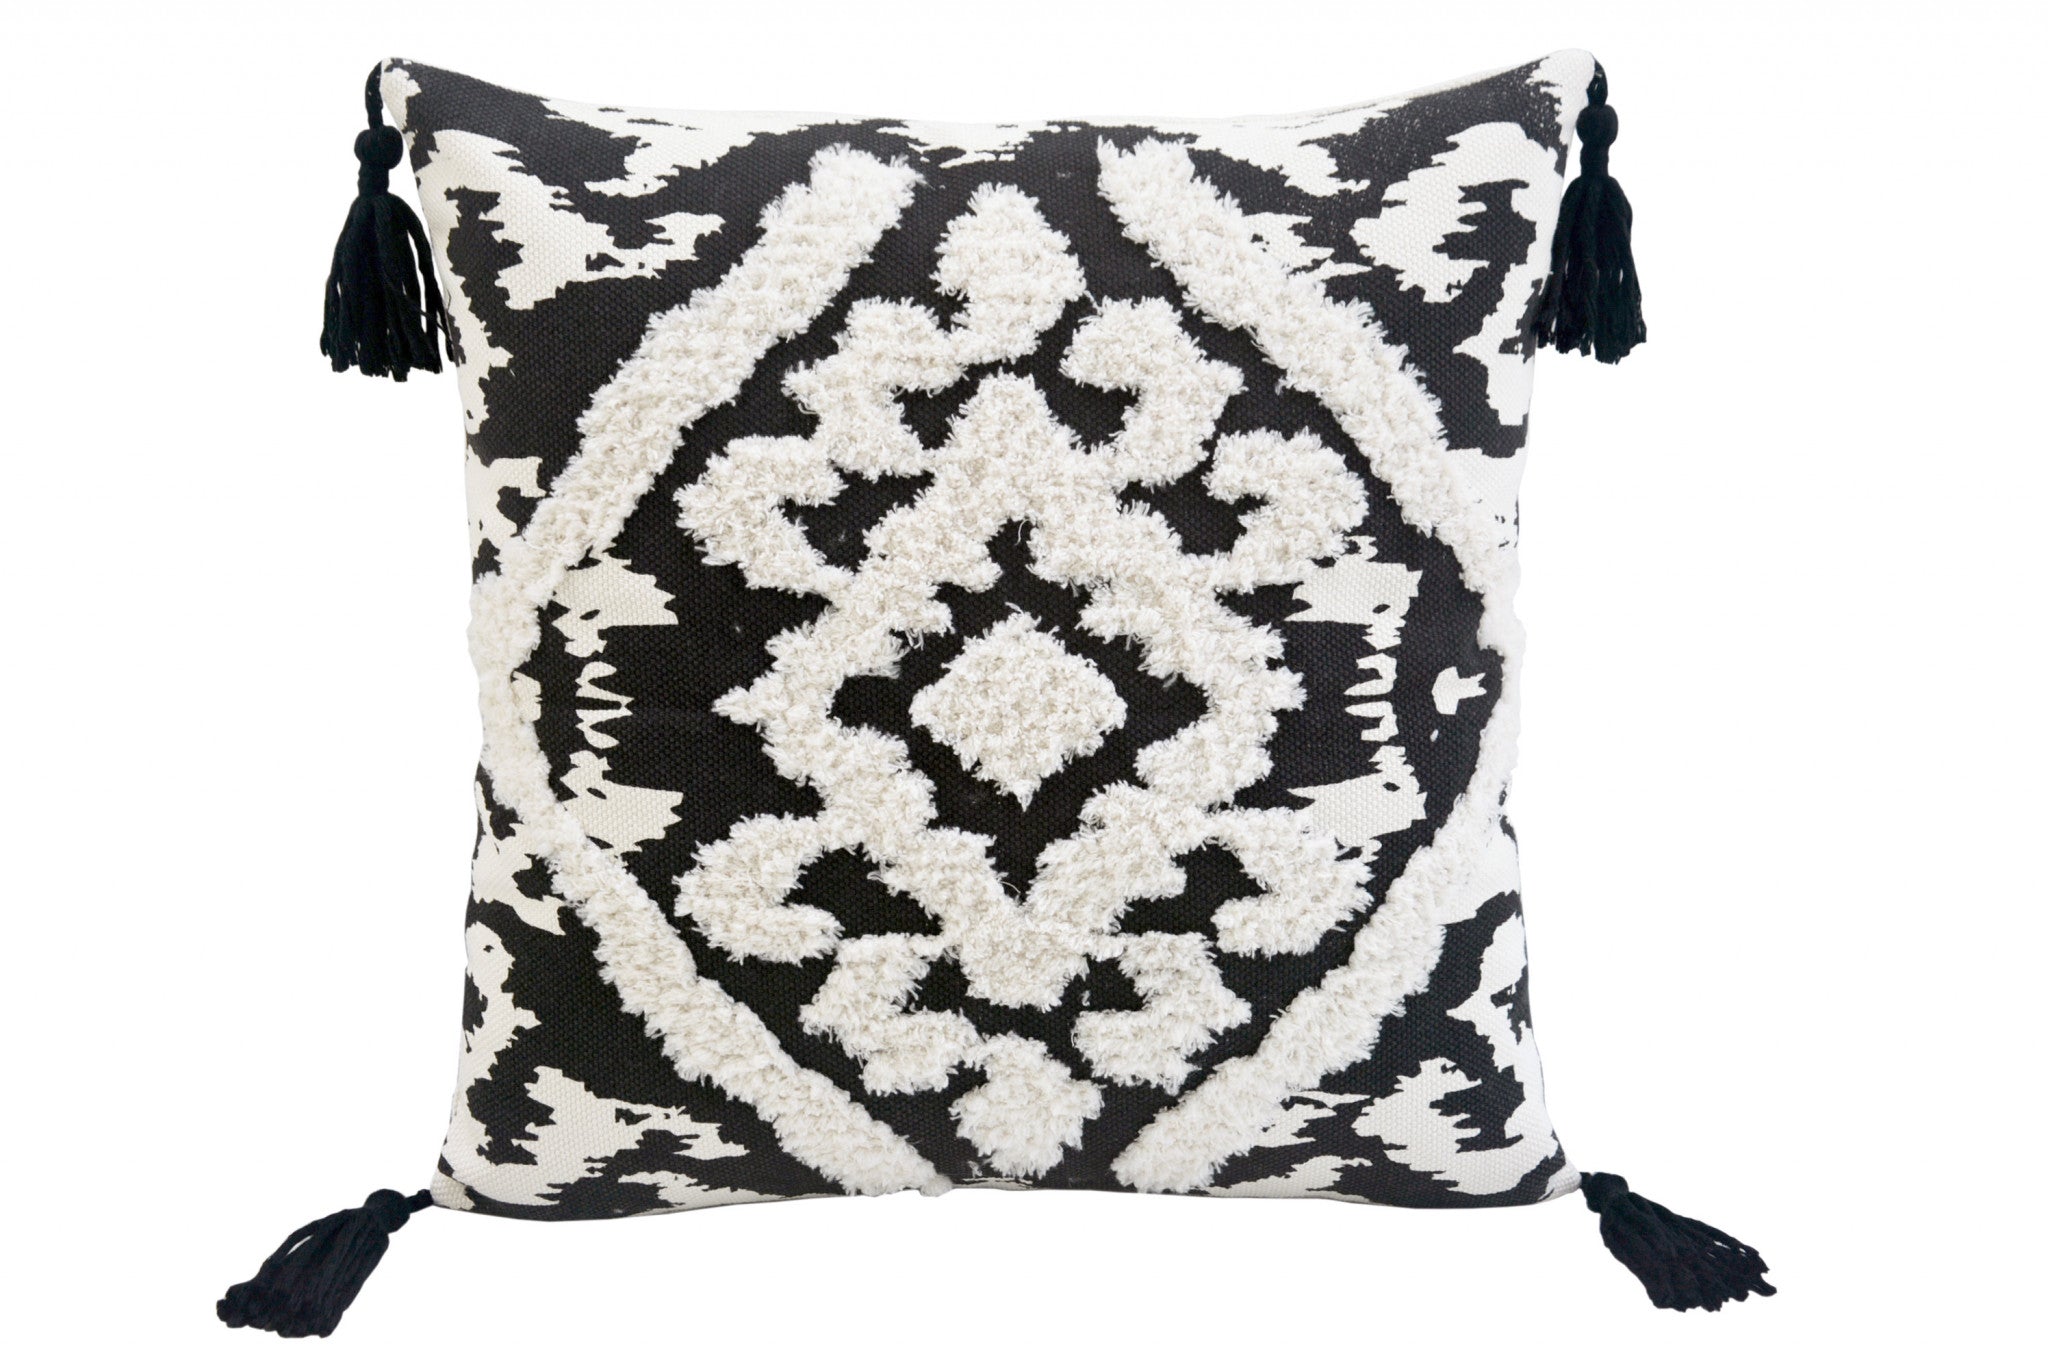 17" X 17" Black and White Textural Geometric Throw Pillow With Tassels